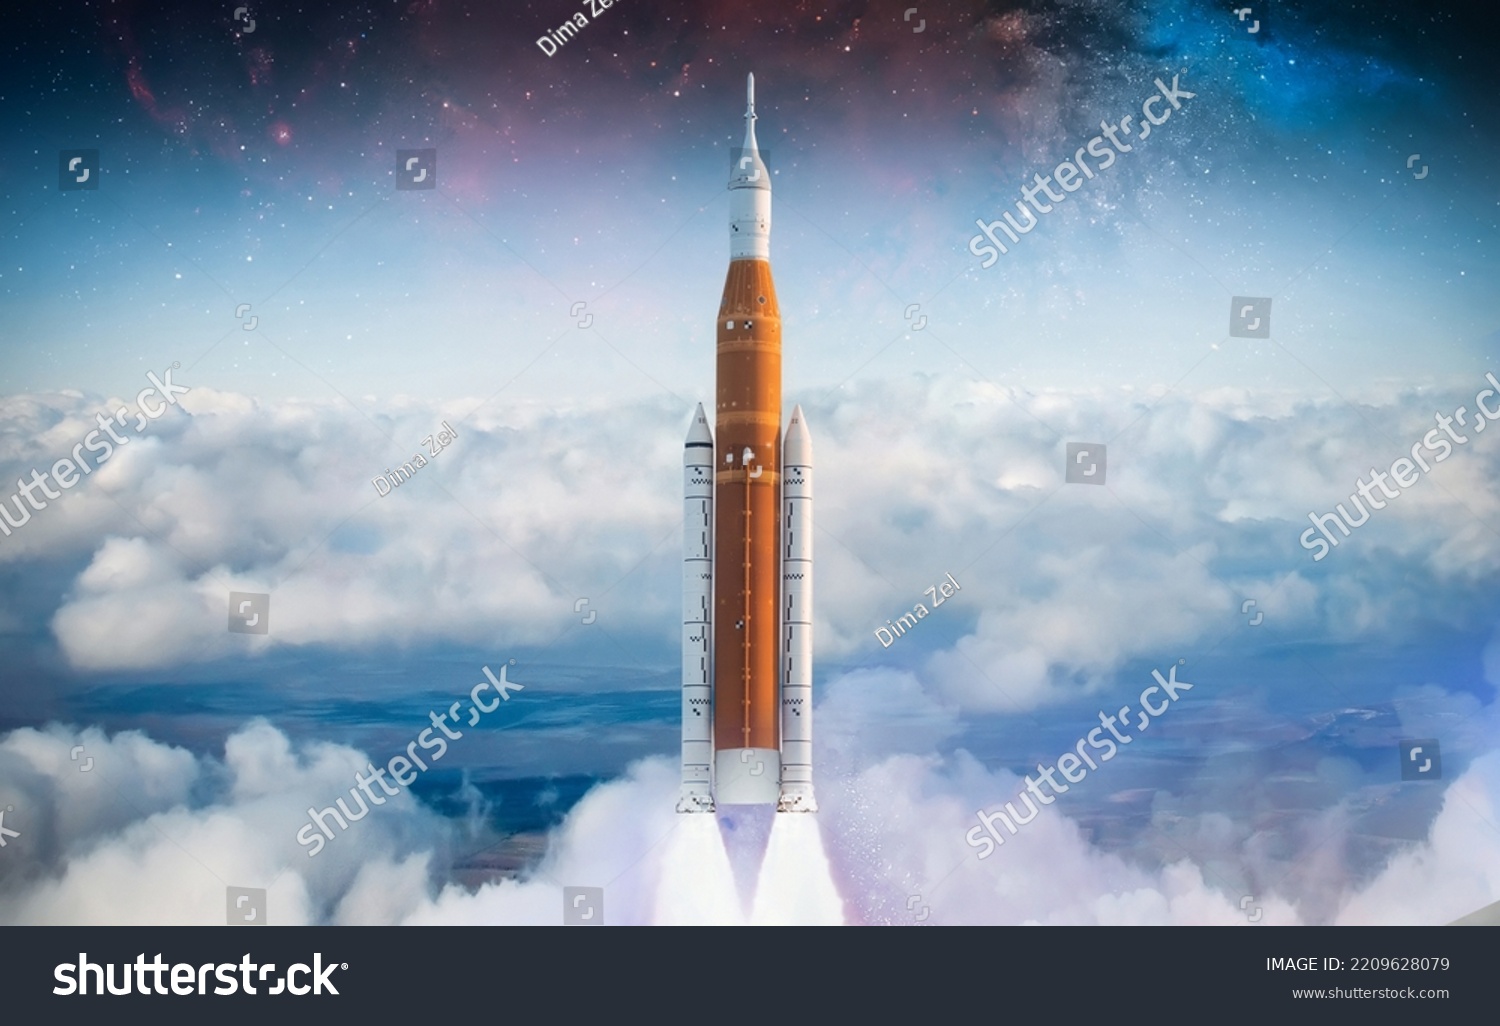 Space rocket take off from Earth. Spacecraft in sky. Mission on Moon of Orion spacecraft. Spaceship take off. Artemis space program. Elements of this image furnished by NASA #2209628079